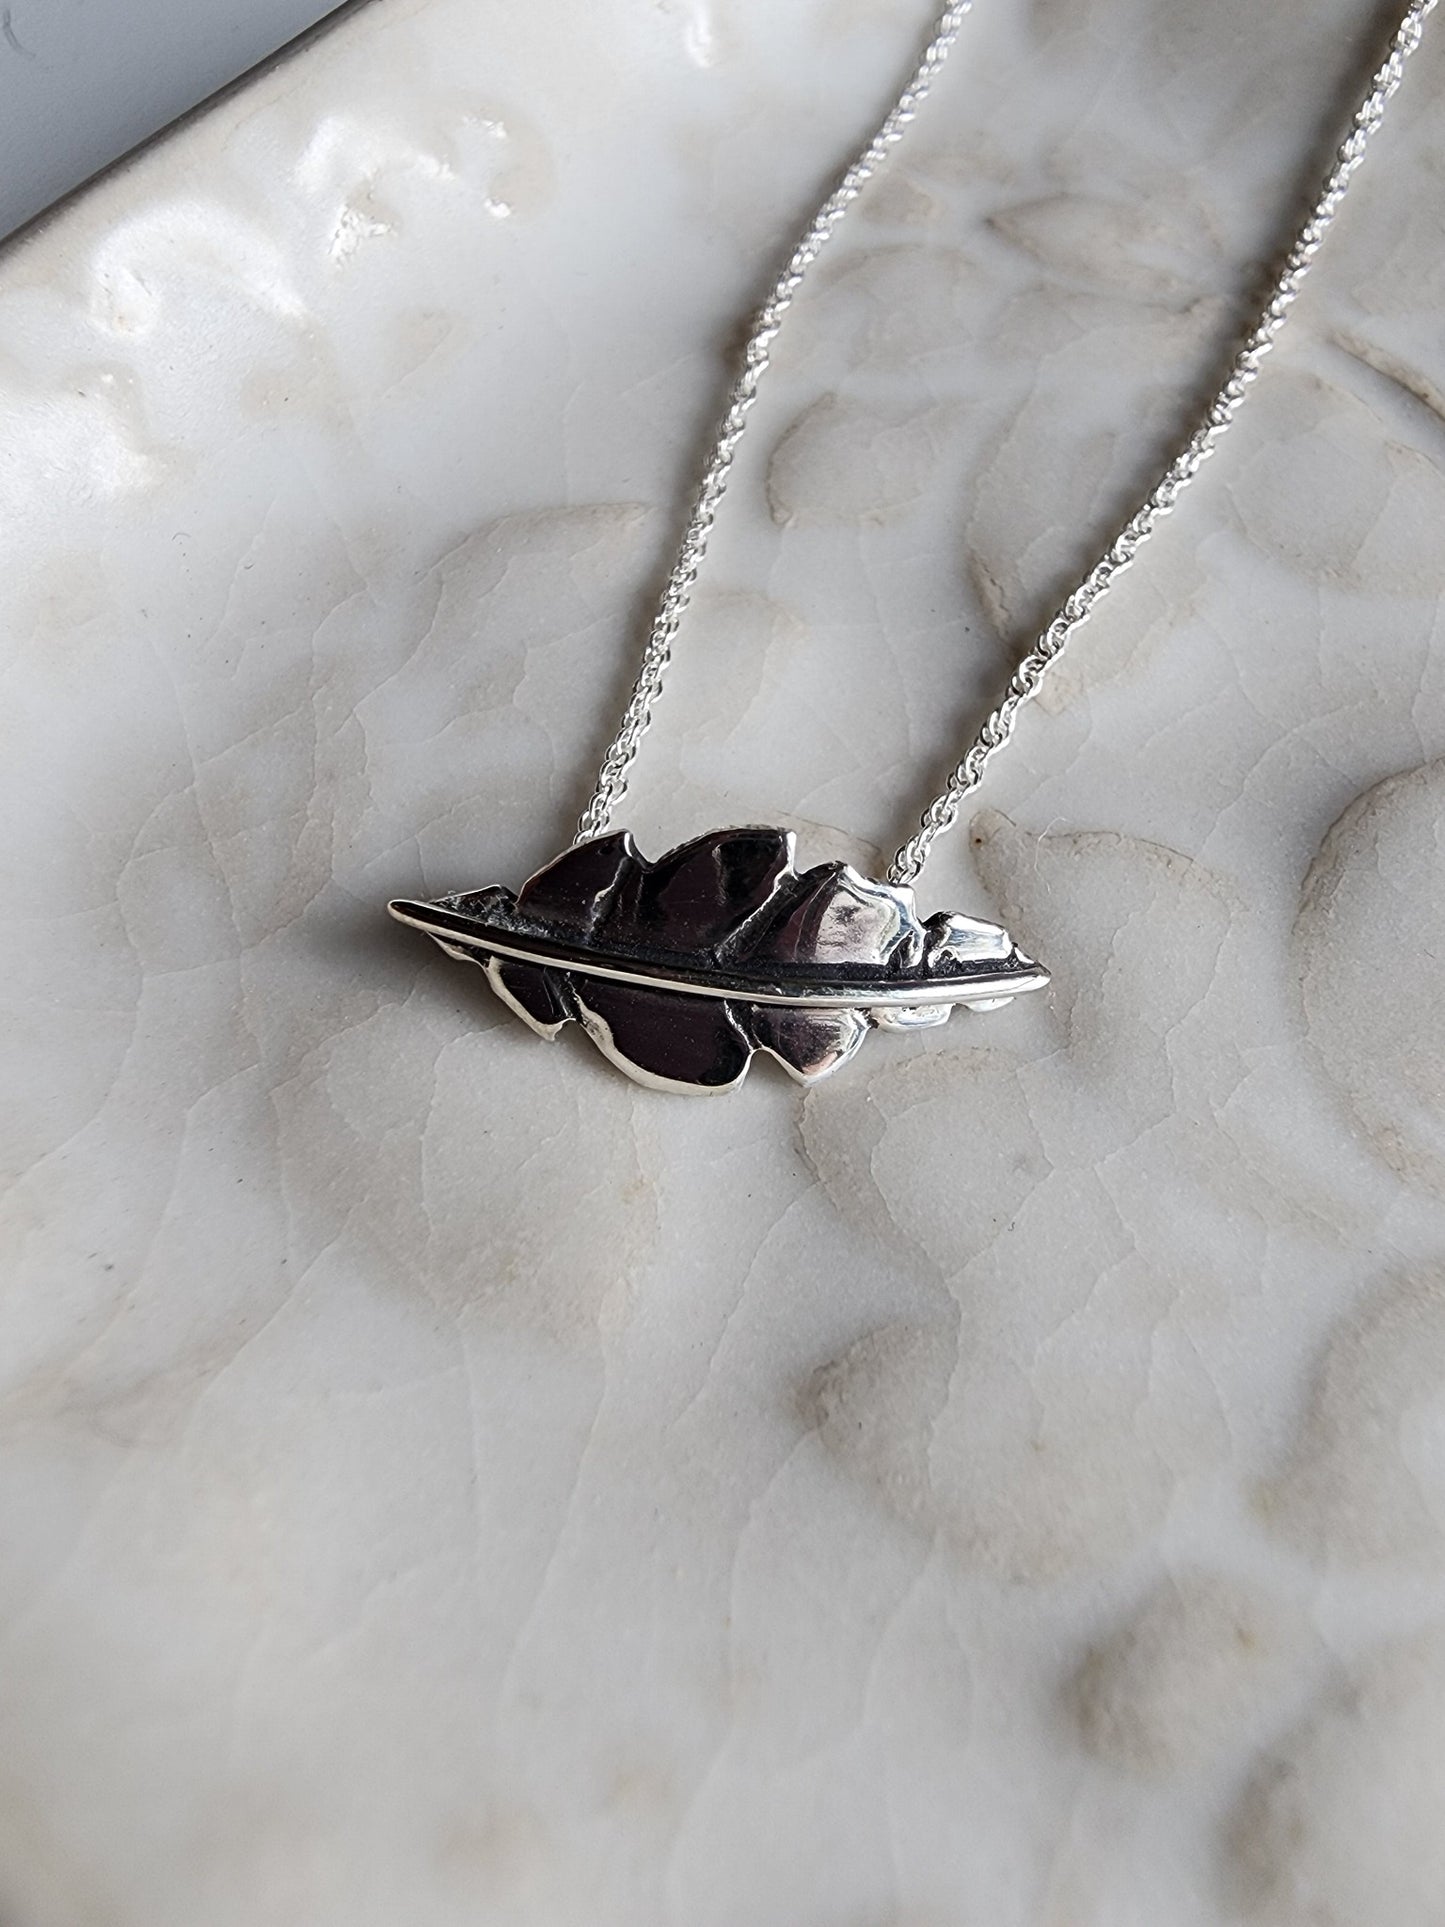 silver leaf necklace, small handmade leaf necklace with vines and stem, hidden clasp for necklace 